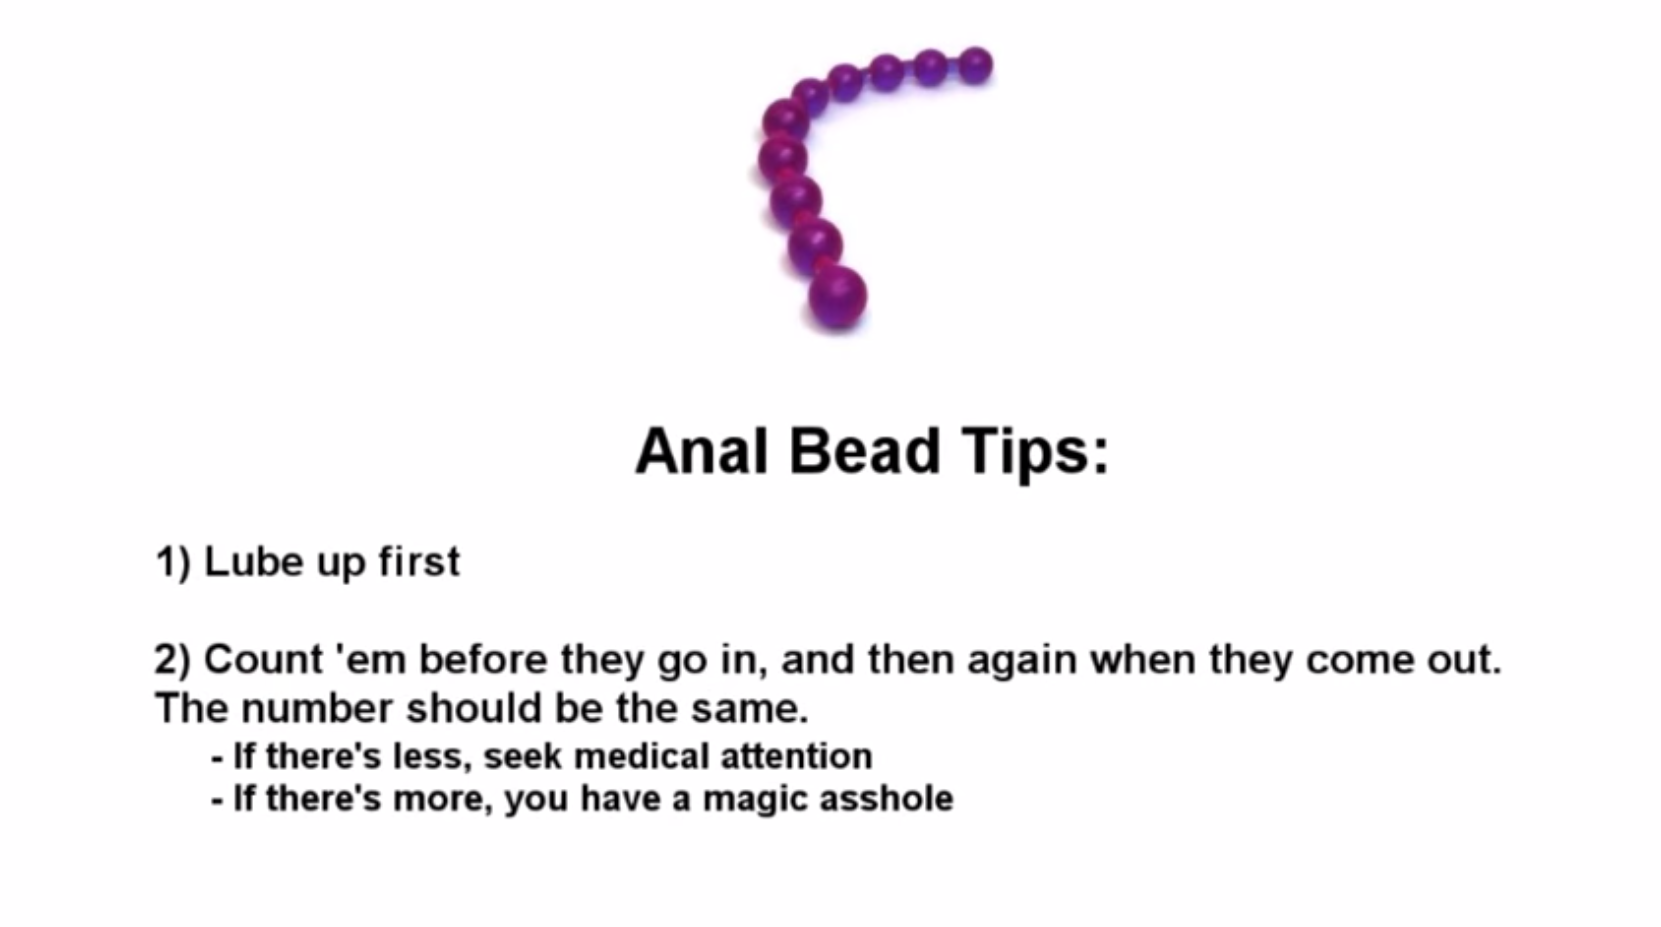 anal beads magic asshole - Anal Bead Tips 1 Lube up first 2 Count 'em ...